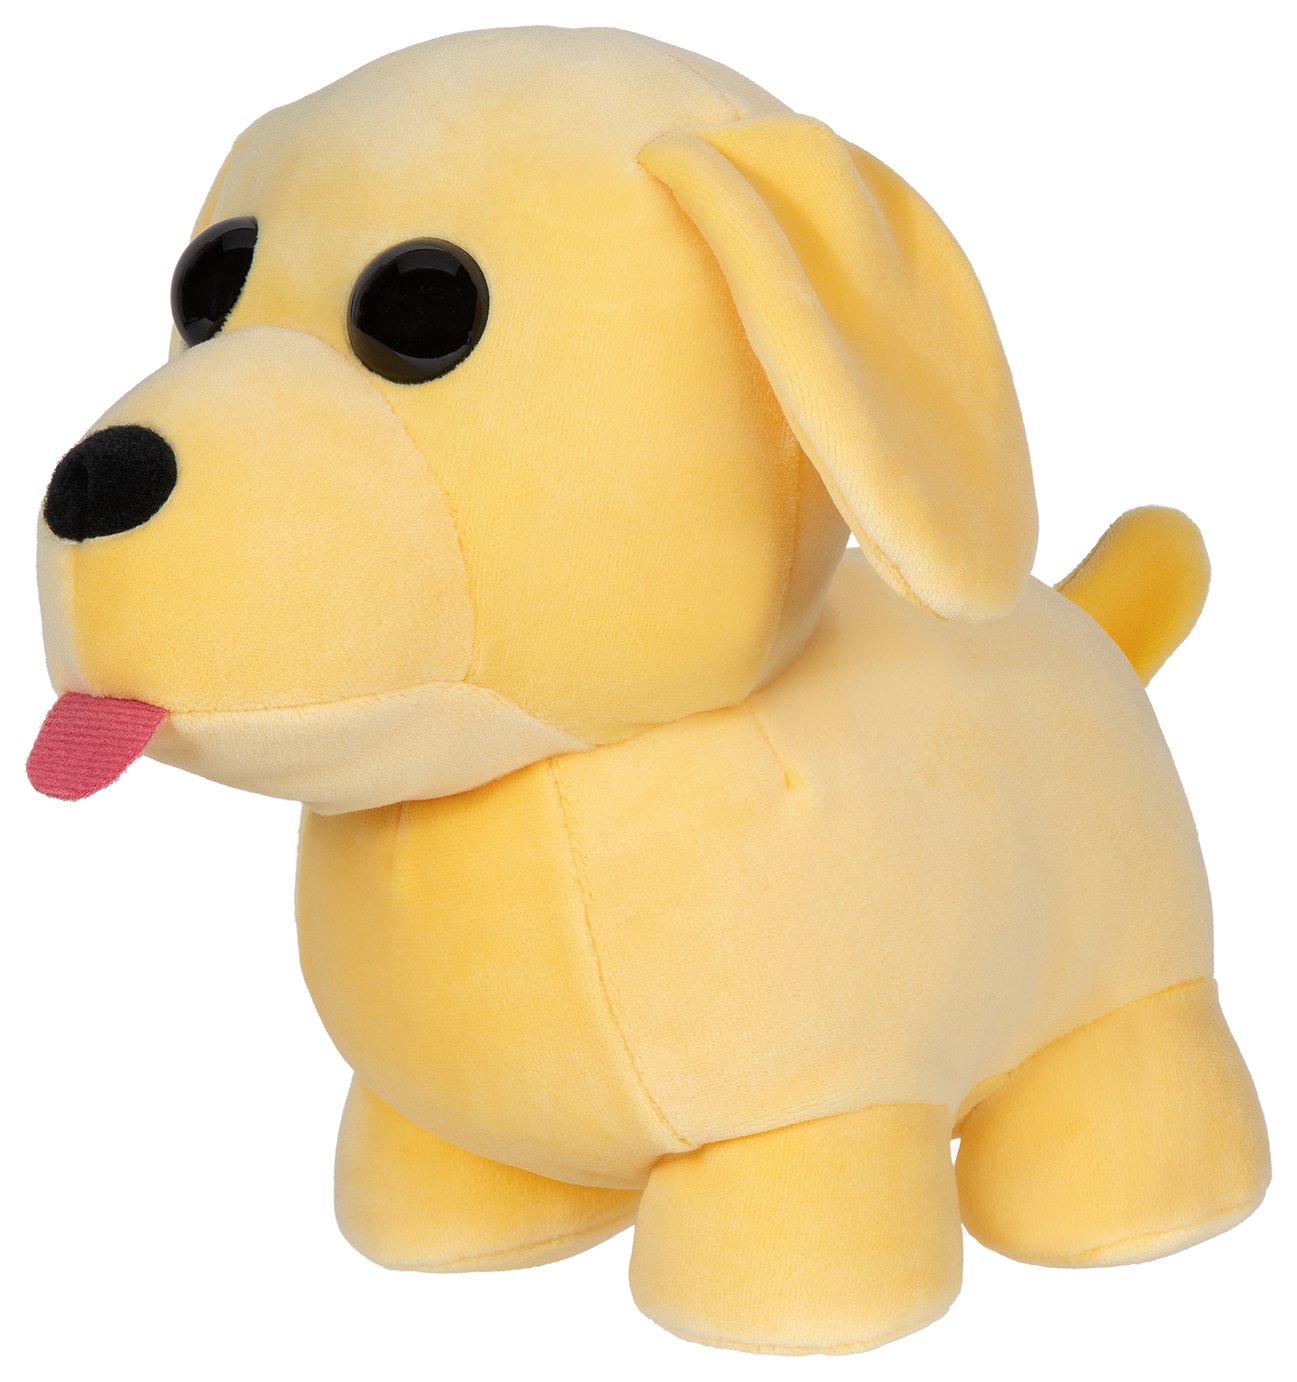 Adopt Me! Collector 8-inch Plush - Dog